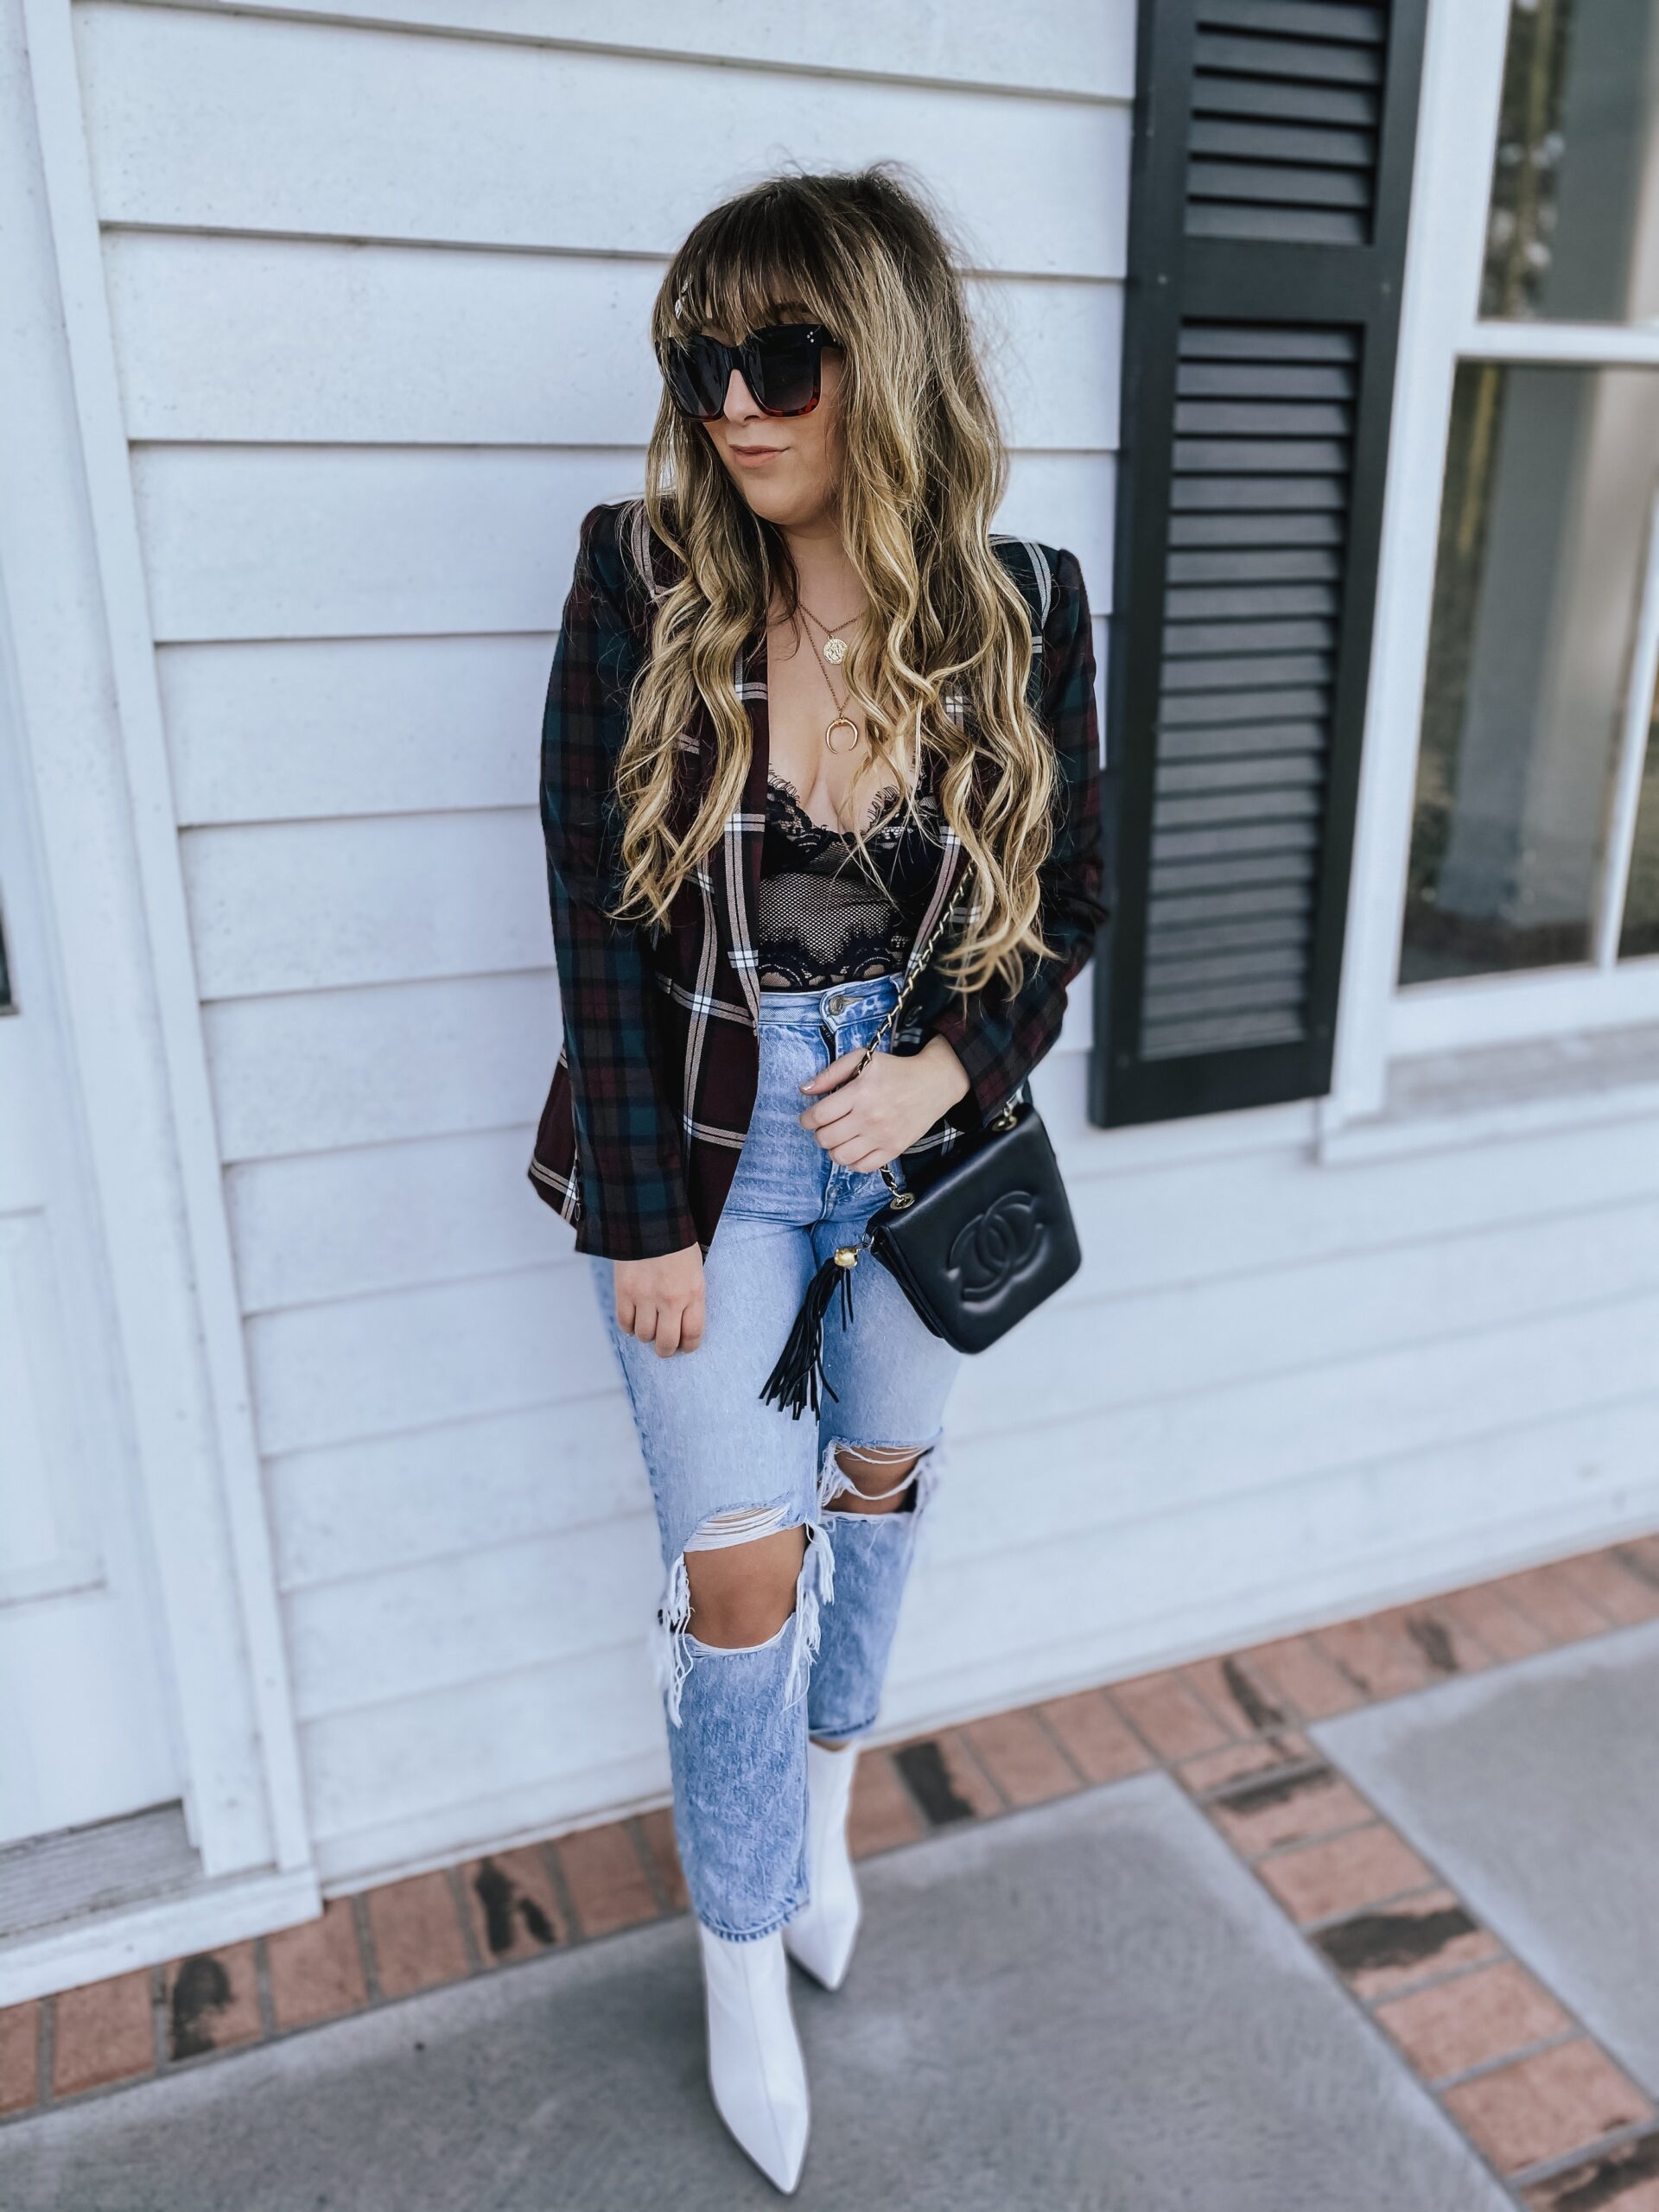 lace bodysuit and jeans outfit